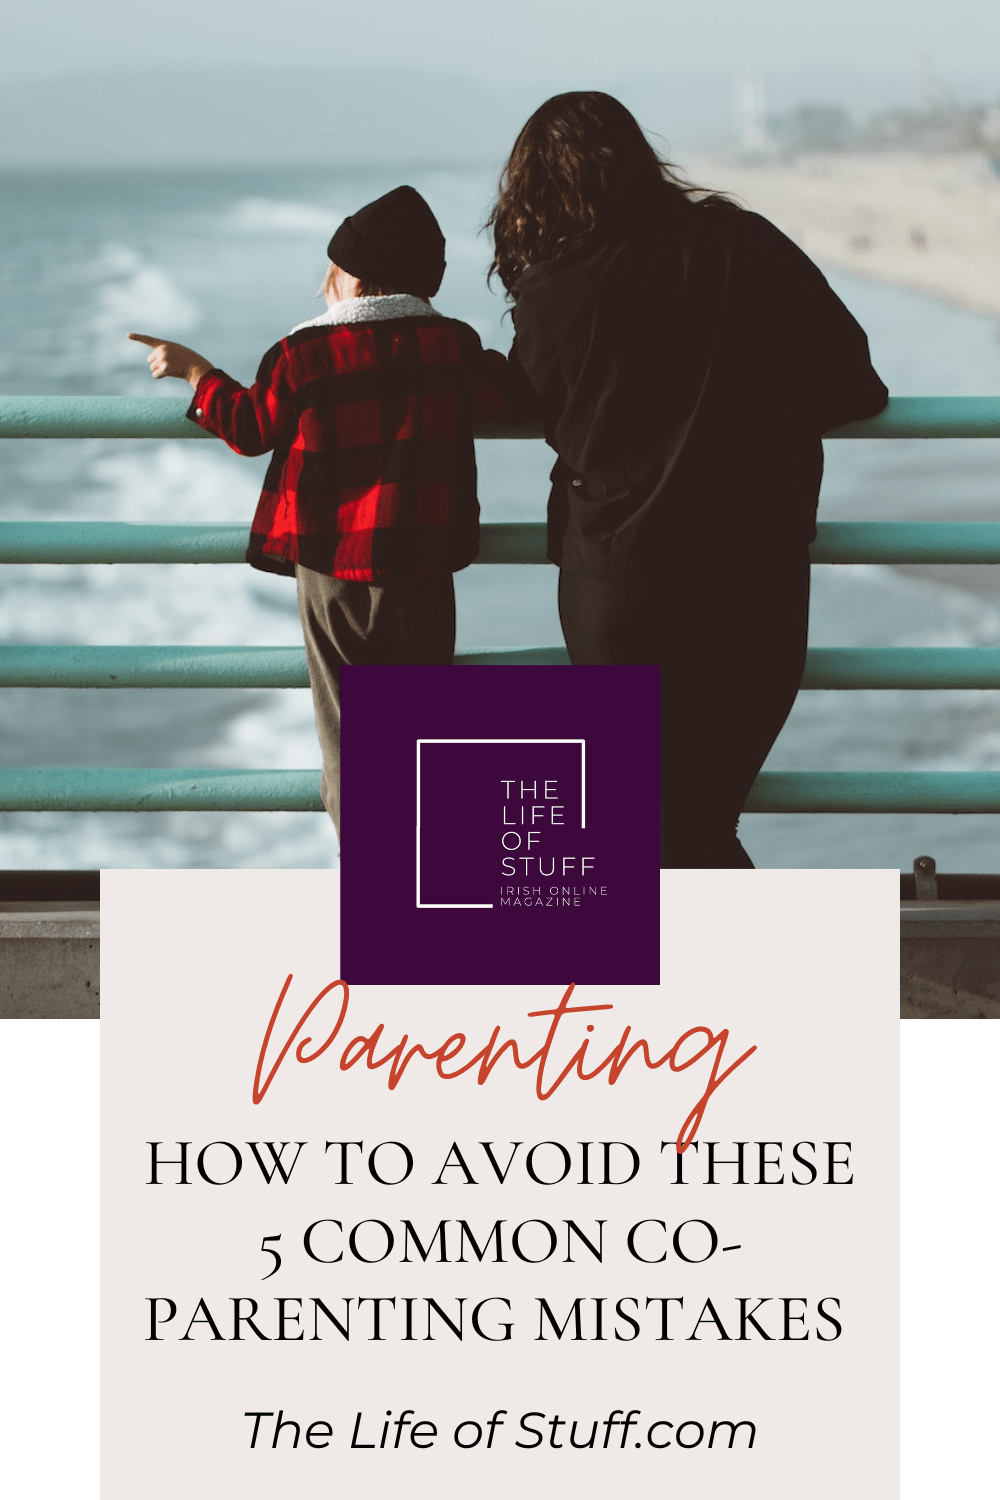 How to Avoid These 5 Common Co-Parenting Mistakes - The Life of Stuff